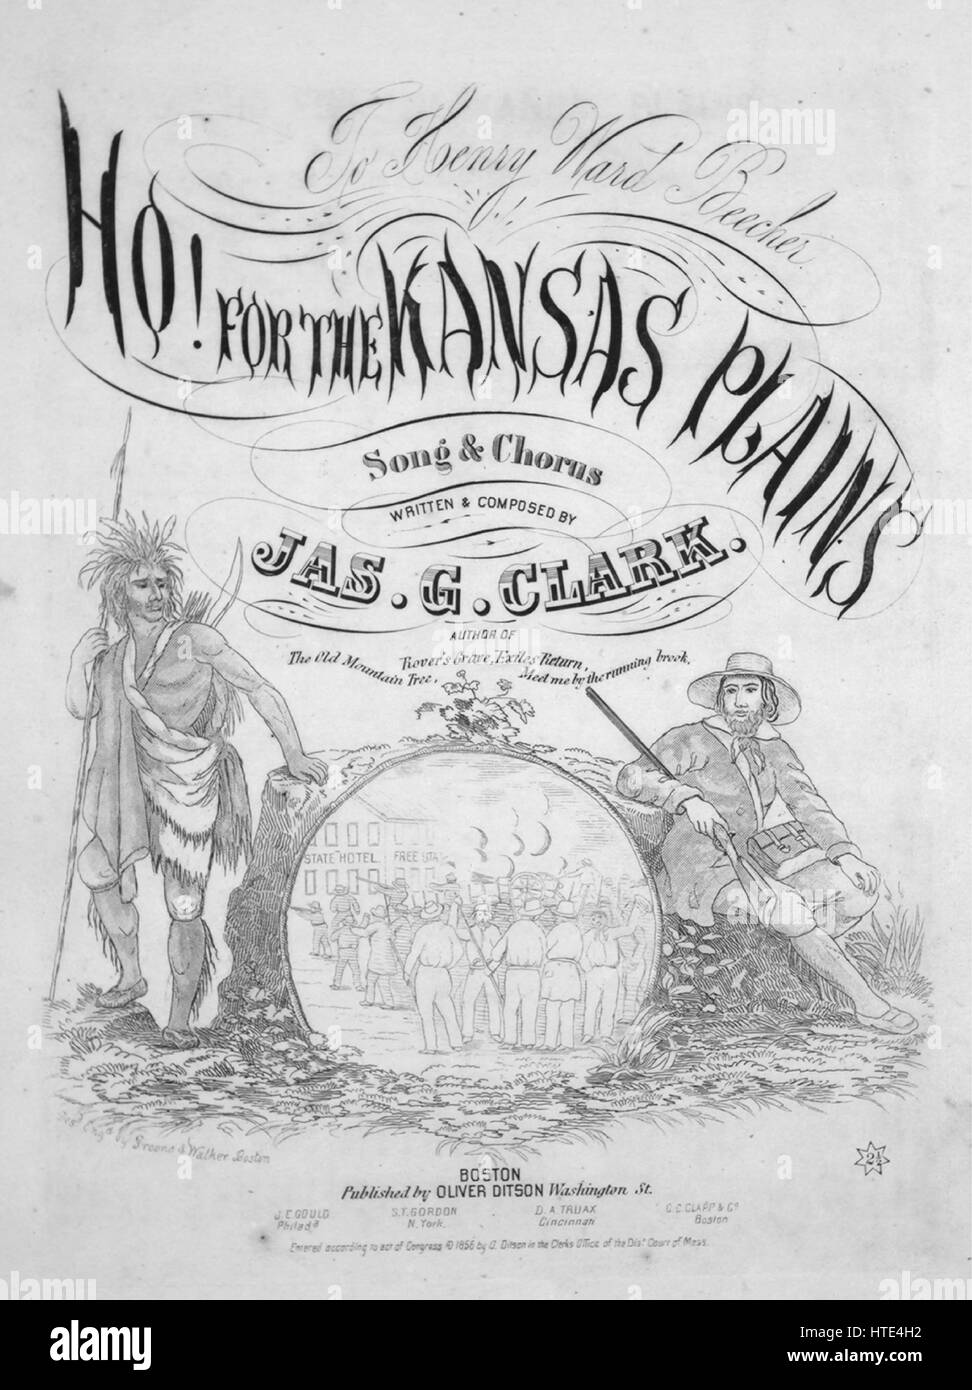 Sheet music cover image of the song 'Ho! for the Kansas Plains Song and Chorus', with original authorship notes reading 'Written and Composed by James G Clark', United States, 1856. The publisher is listed as 'Oliver Ditson, Washington St.', the form of composition is 'strophic with satb chorus', the instrumentation is 'piano and voice', the first line reads 'Huzza for the prairies wide and free', and the illustration artist is listed as 'Desd. Engd. by Greene and Walker Boston'. Stock Photo